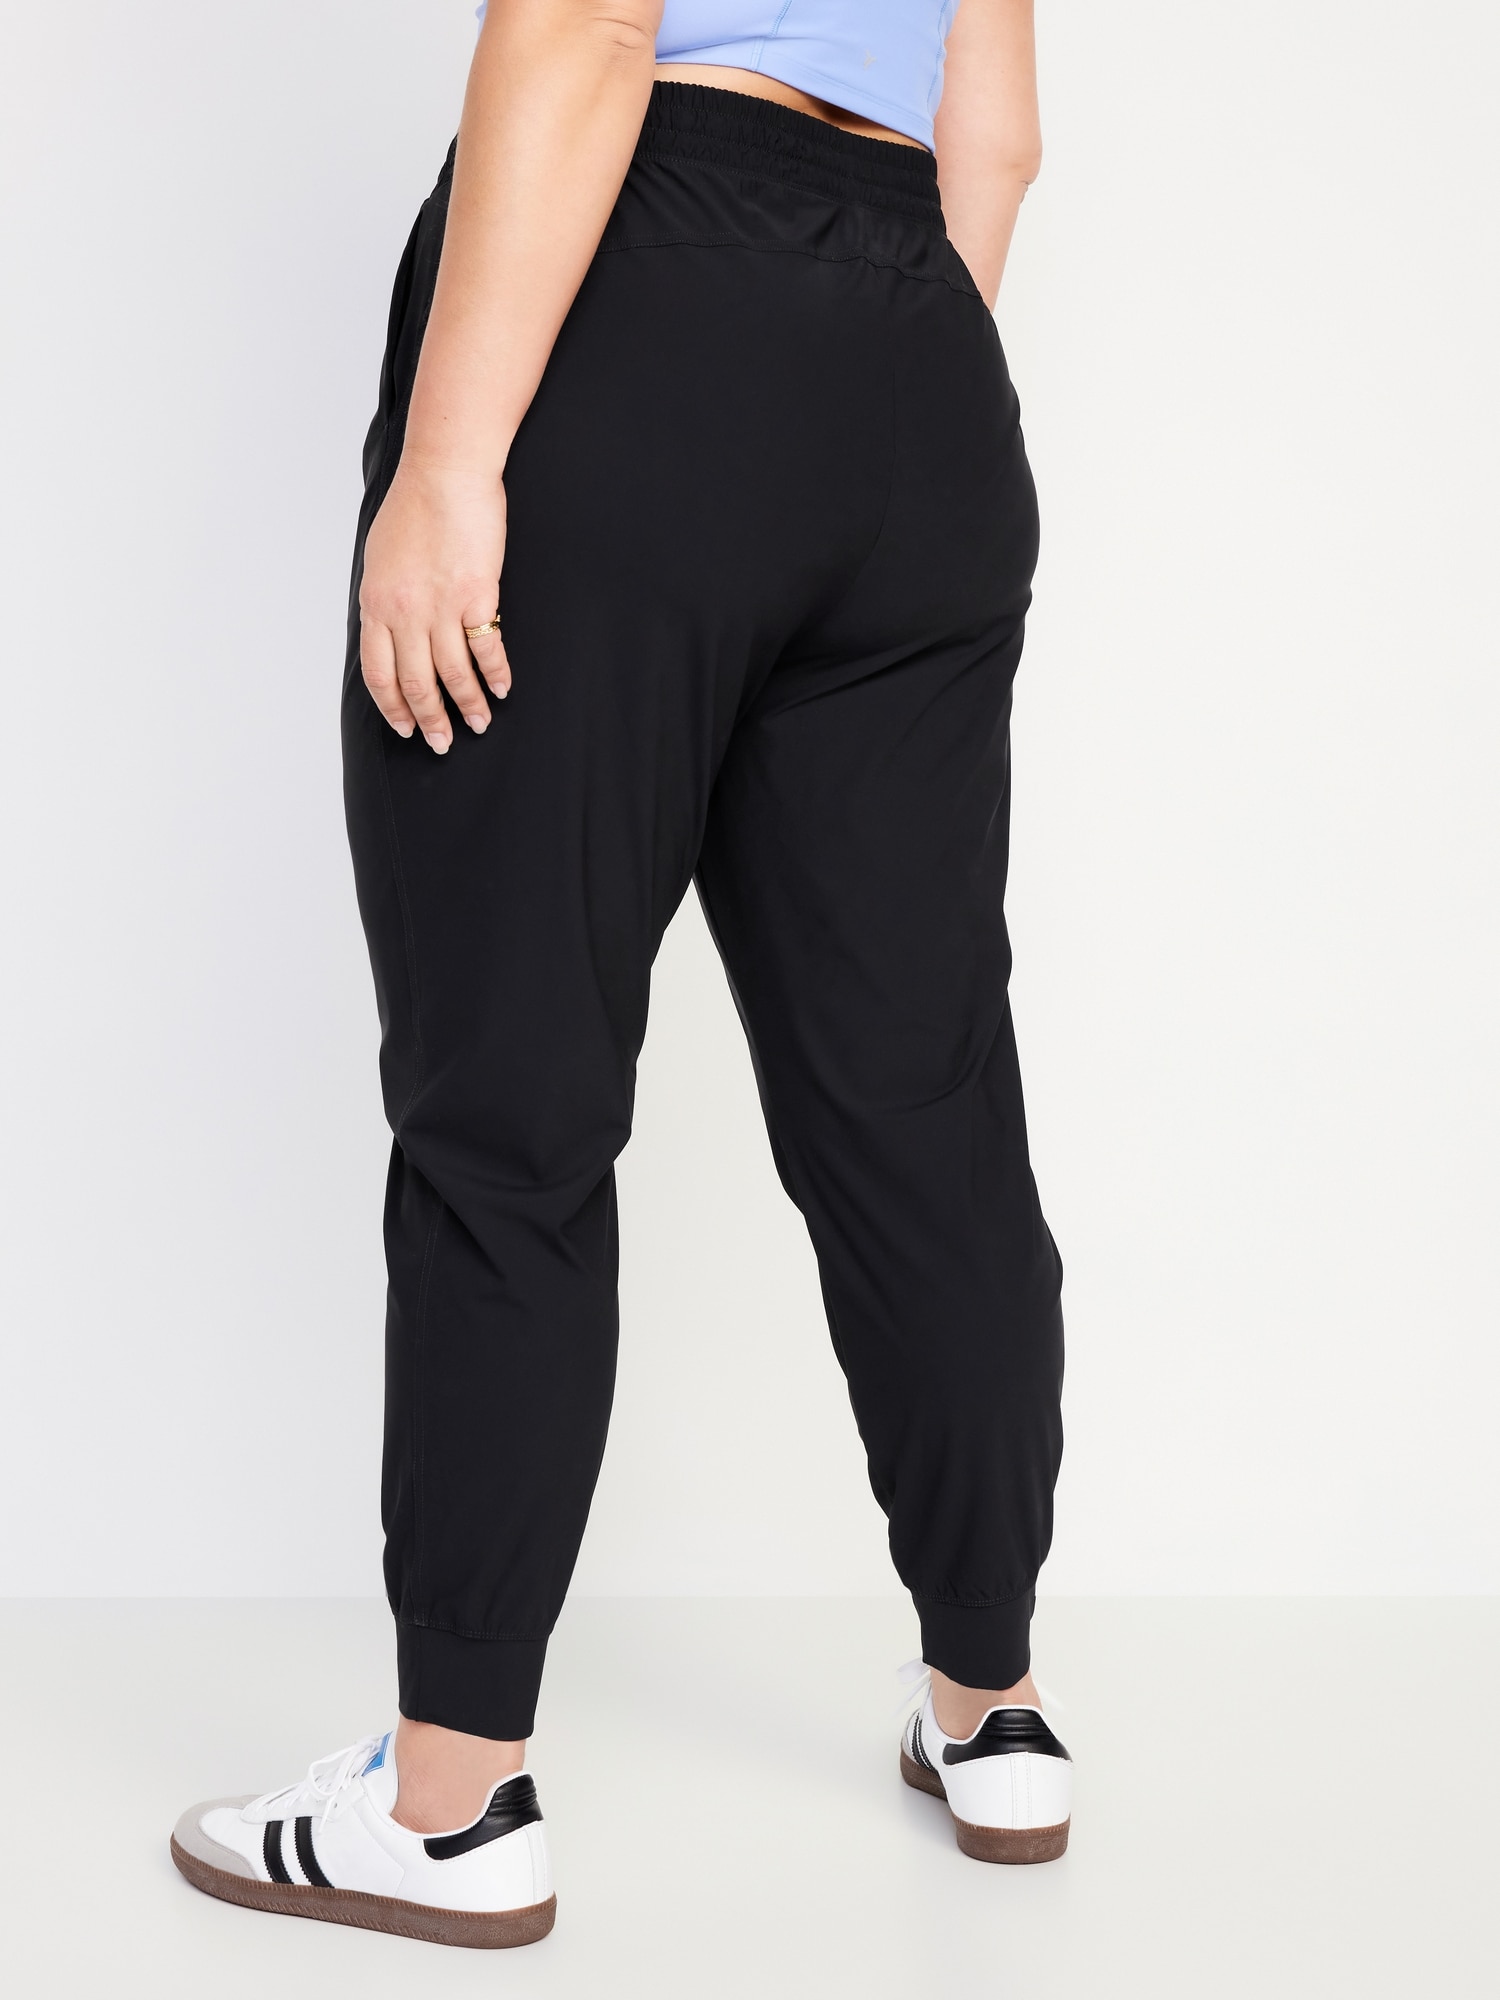 High-Waisted SleekTech Jogger Pants for Women | Old Navy